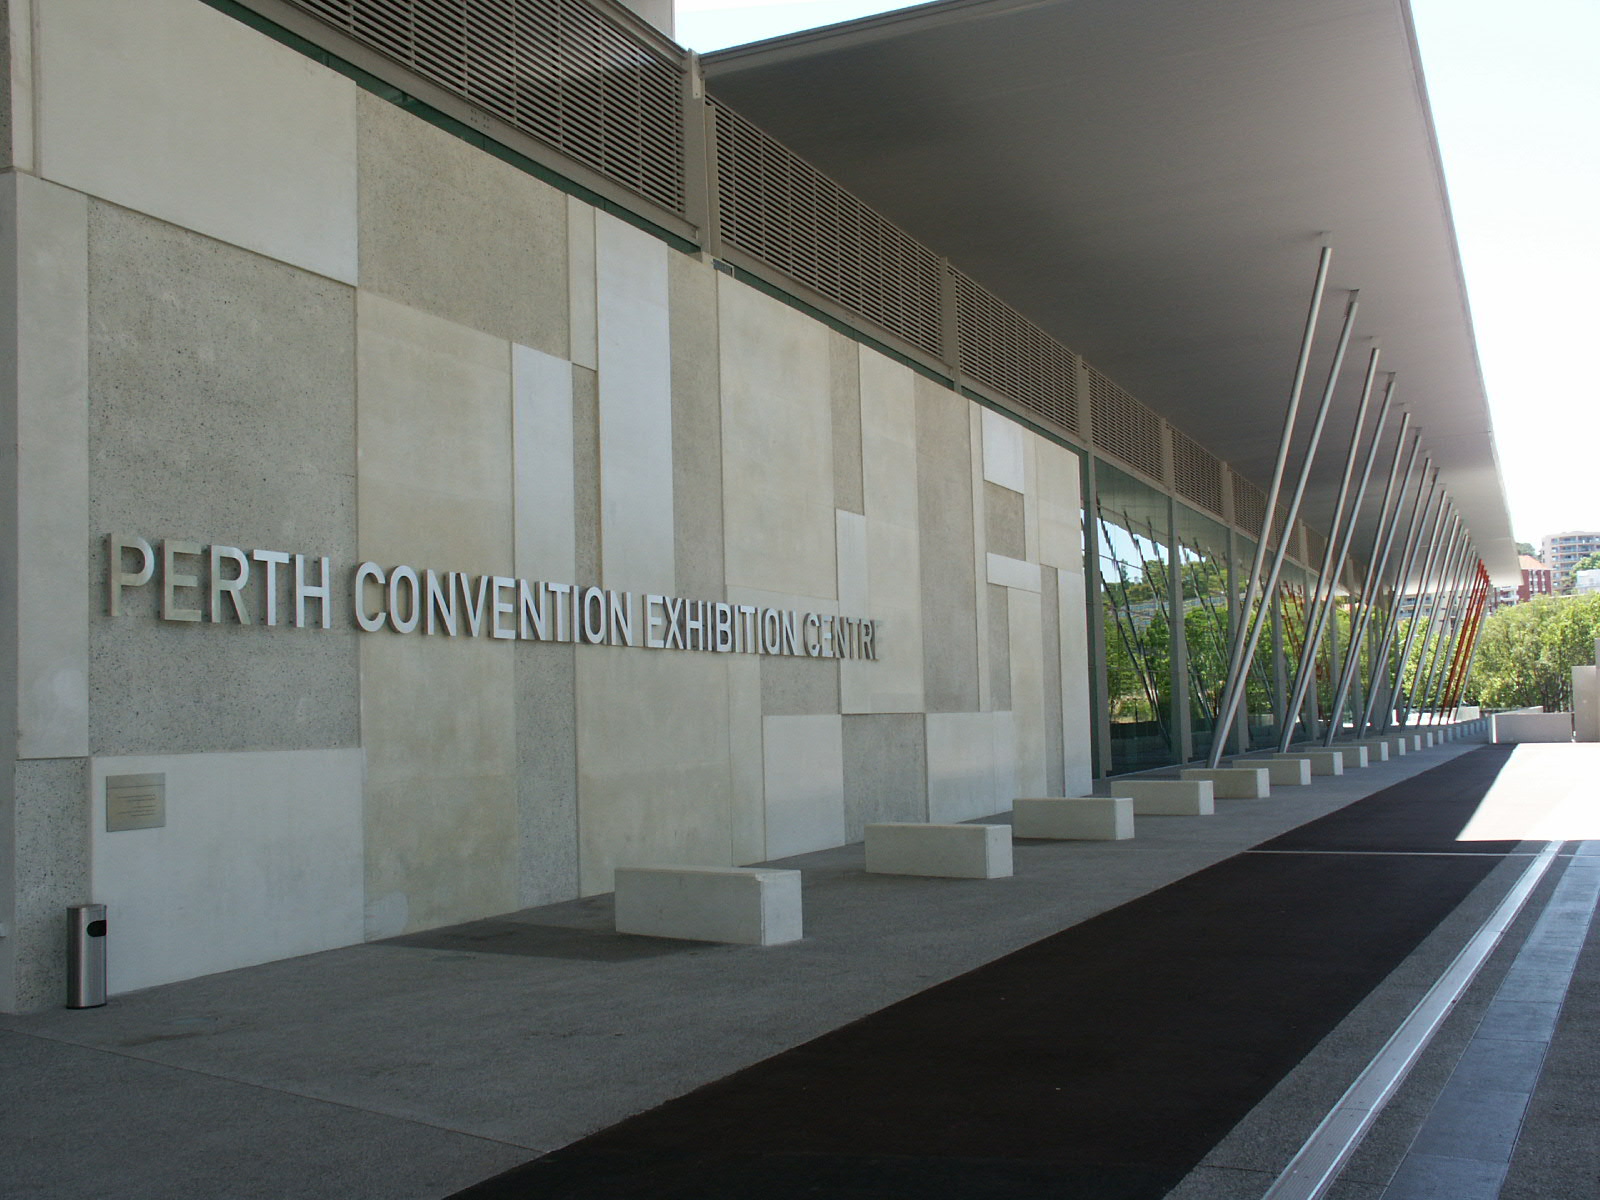 conference centers perth meeting room business convention exhibition centre zoo hbf arena ascot racecourse